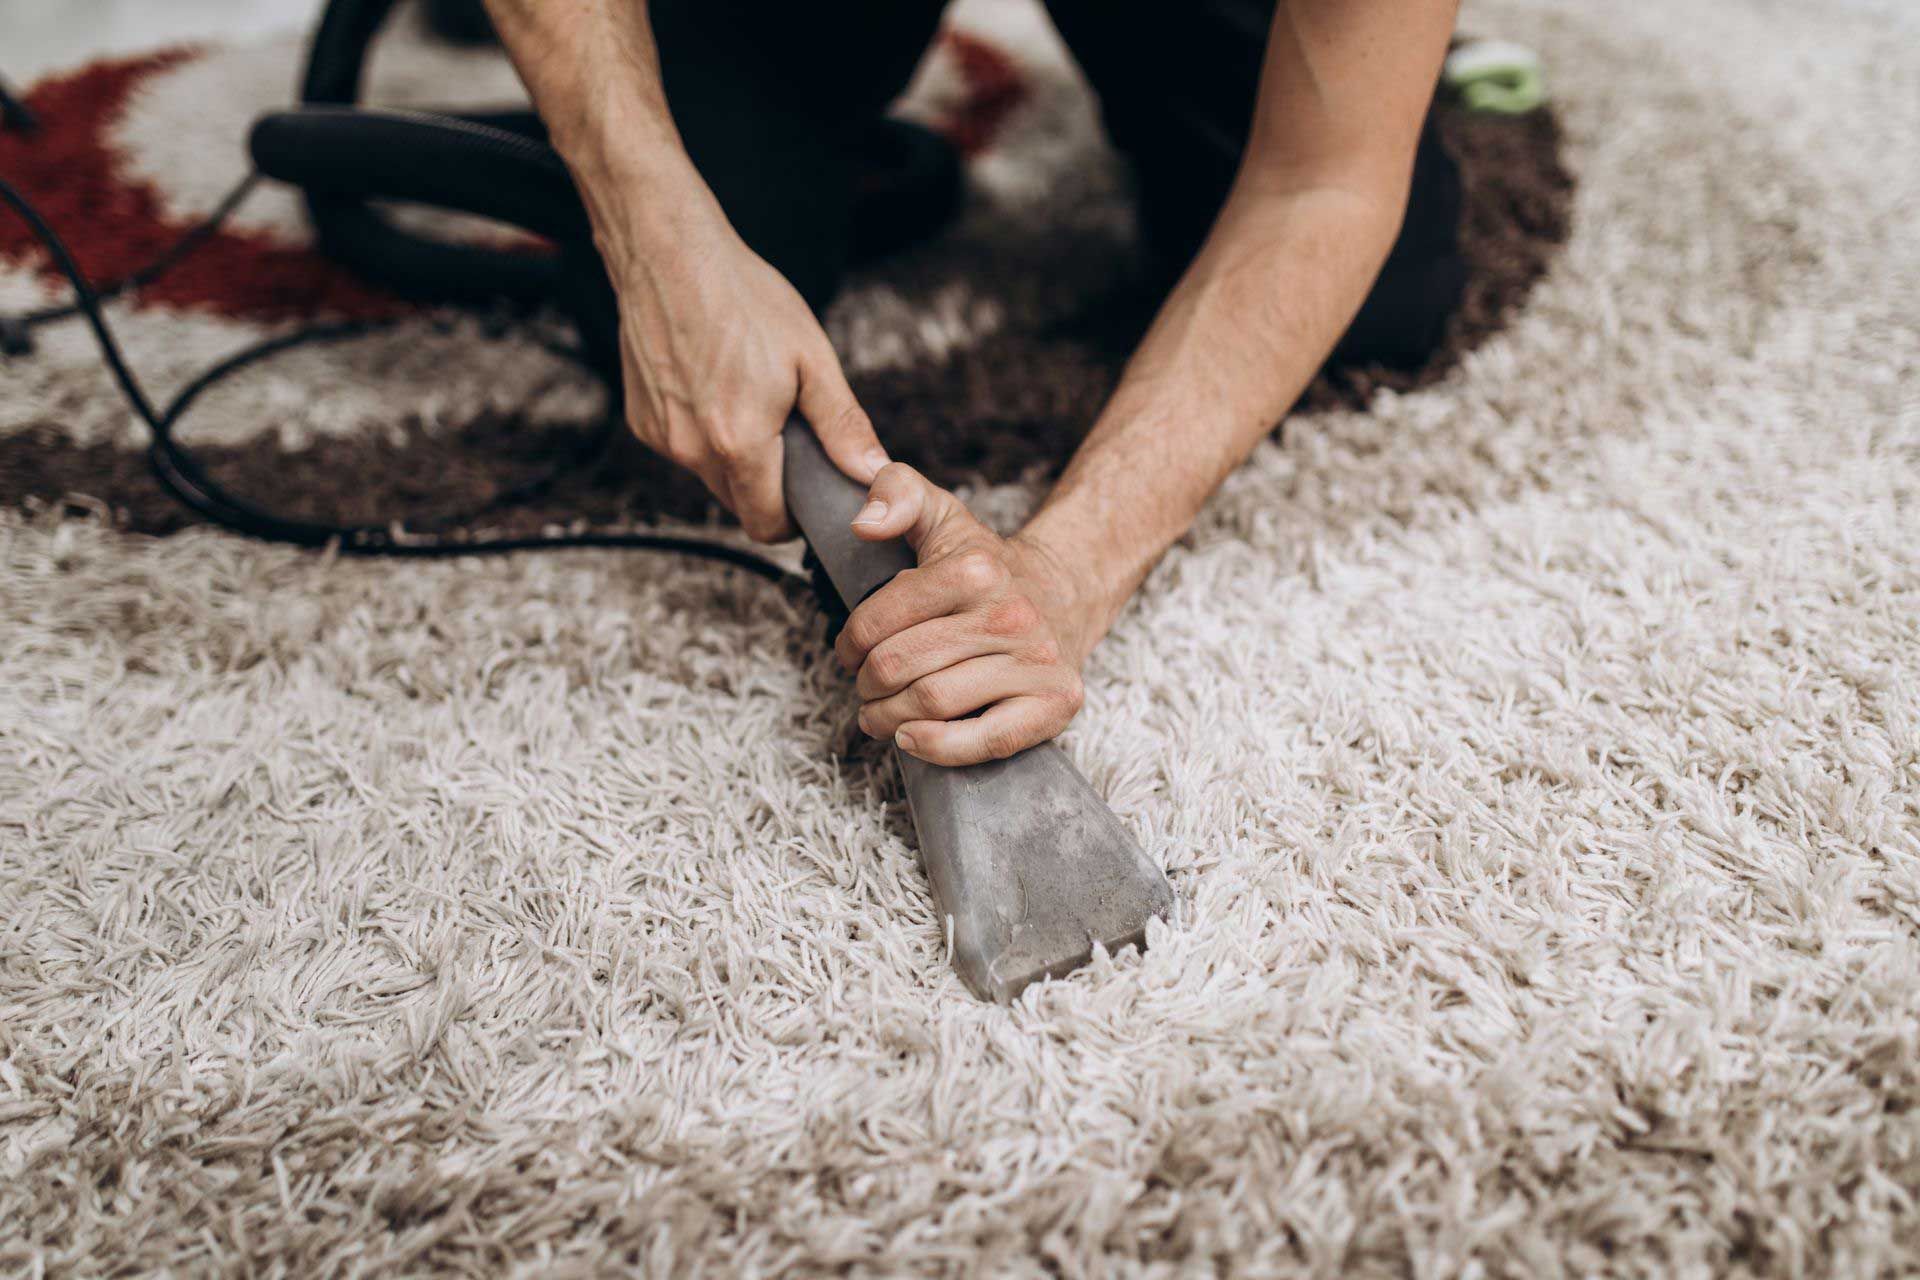 Worker Removing Dust on Carpet